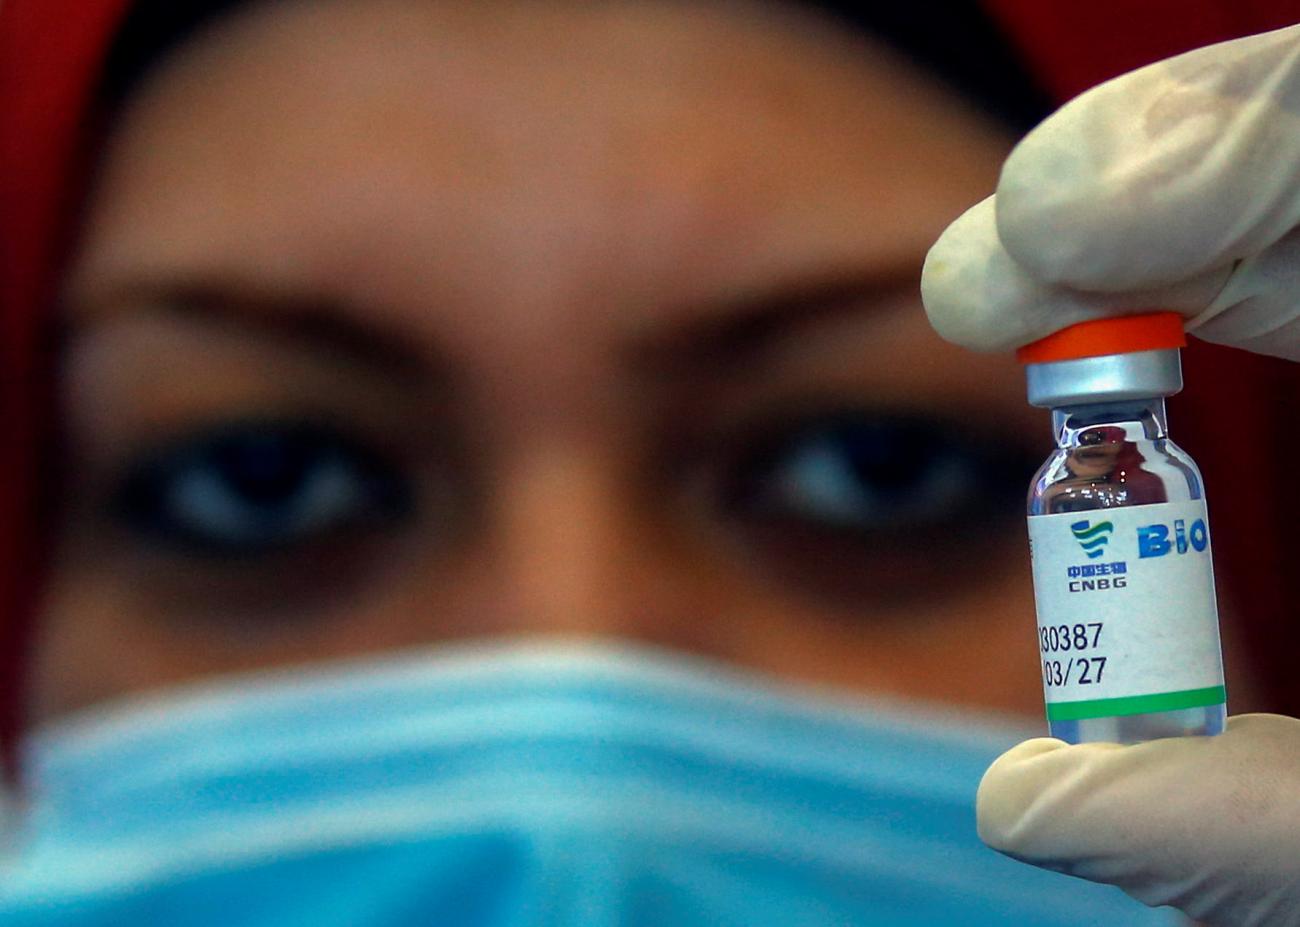 A close-up photo shows the eyes and mask of a nurse holding up a vial of China's Sinopharm COVID-19 vaccine at a vaccination venue at the International Exhibition Center in Cairo, Egypt, on June 2, 2021. 